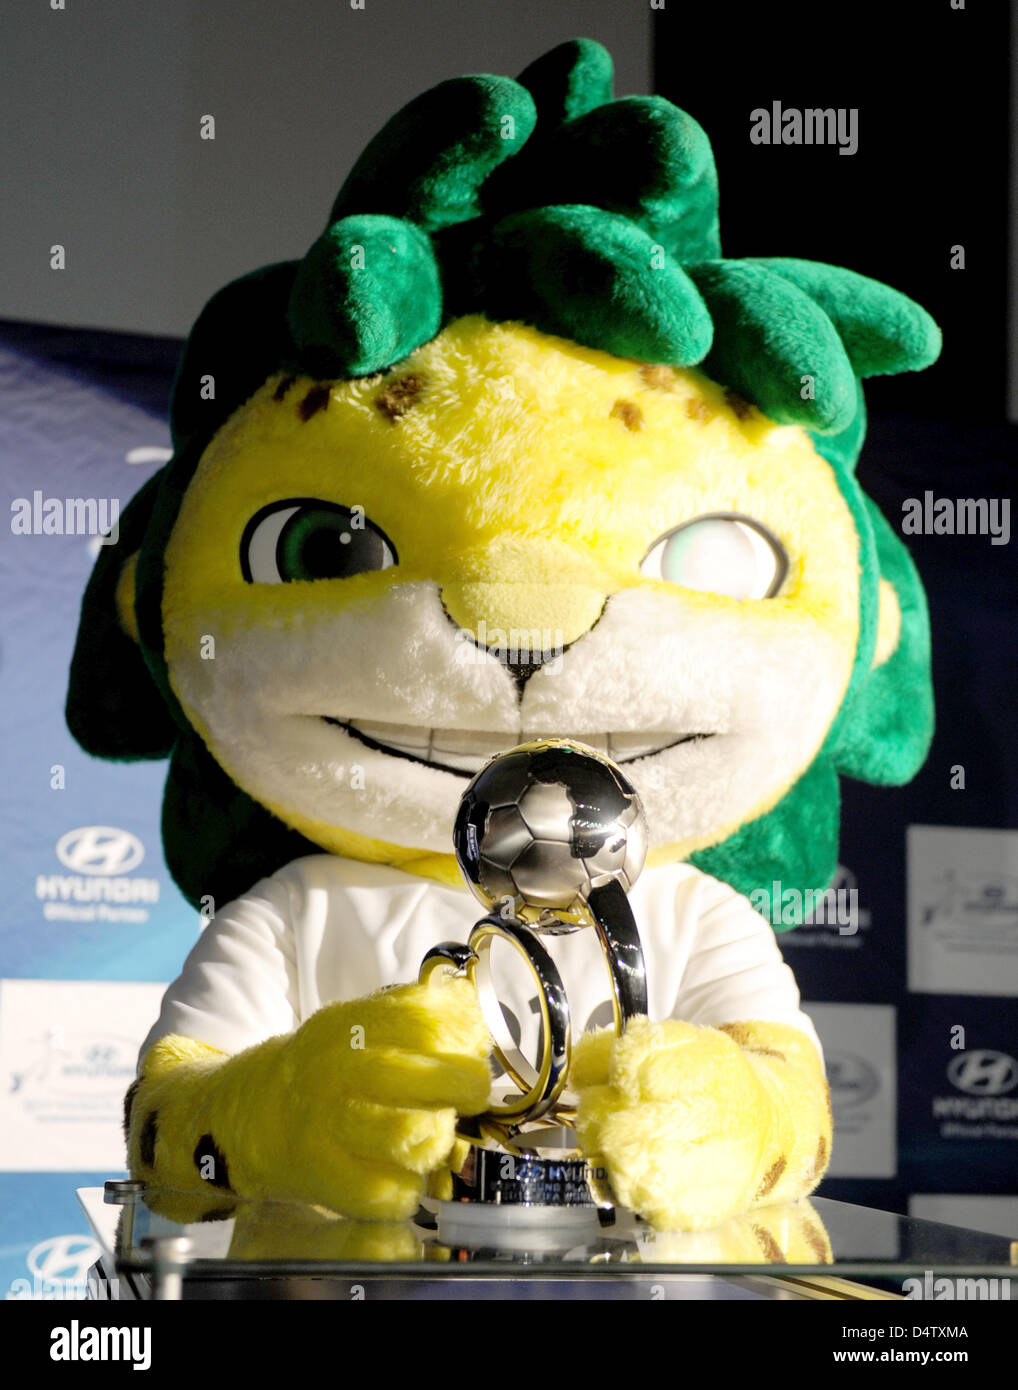 Mascot Zakumi presents the Best Young Player Award of the FIFA World Cup 2010 in Cape Town, South Africa, 02 December 2009. The award is sponsored by Hyundai. Photo: Bernd Weissbrod Stock Photo